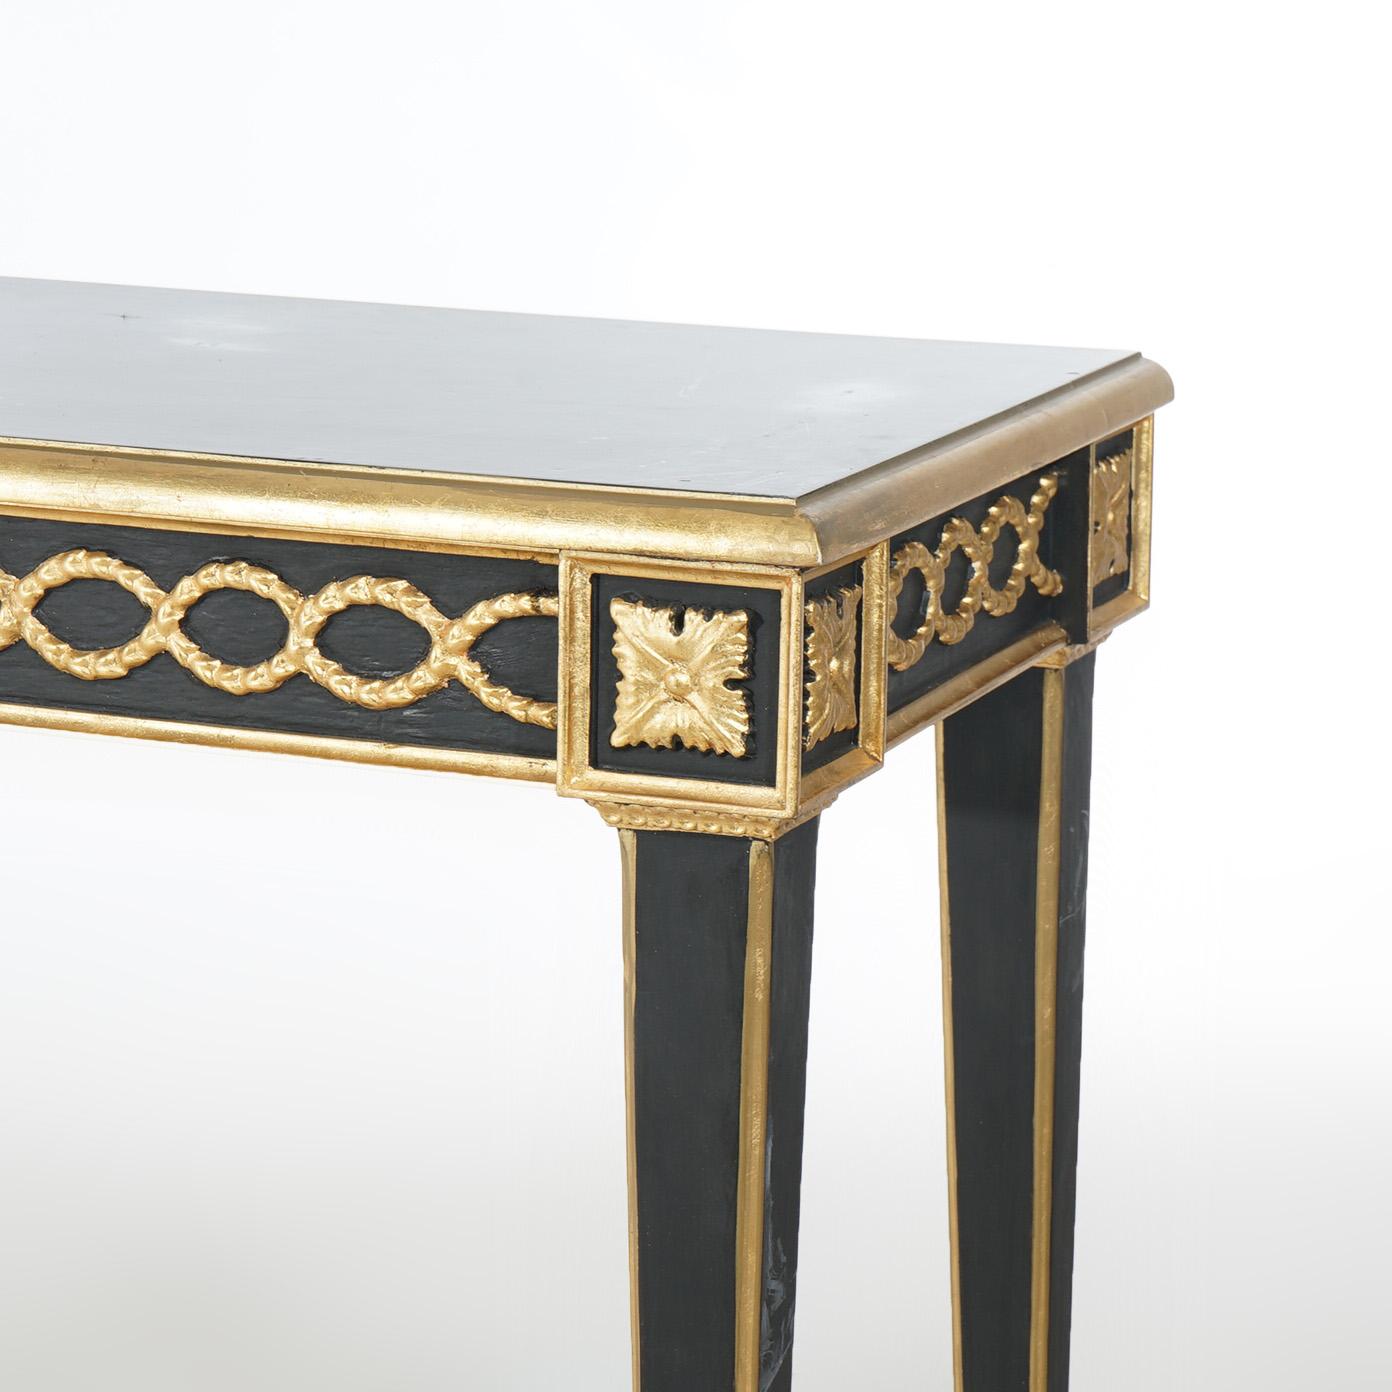 French Empire Style Ebonized & Gilt Console Table 20thC For Sale 3